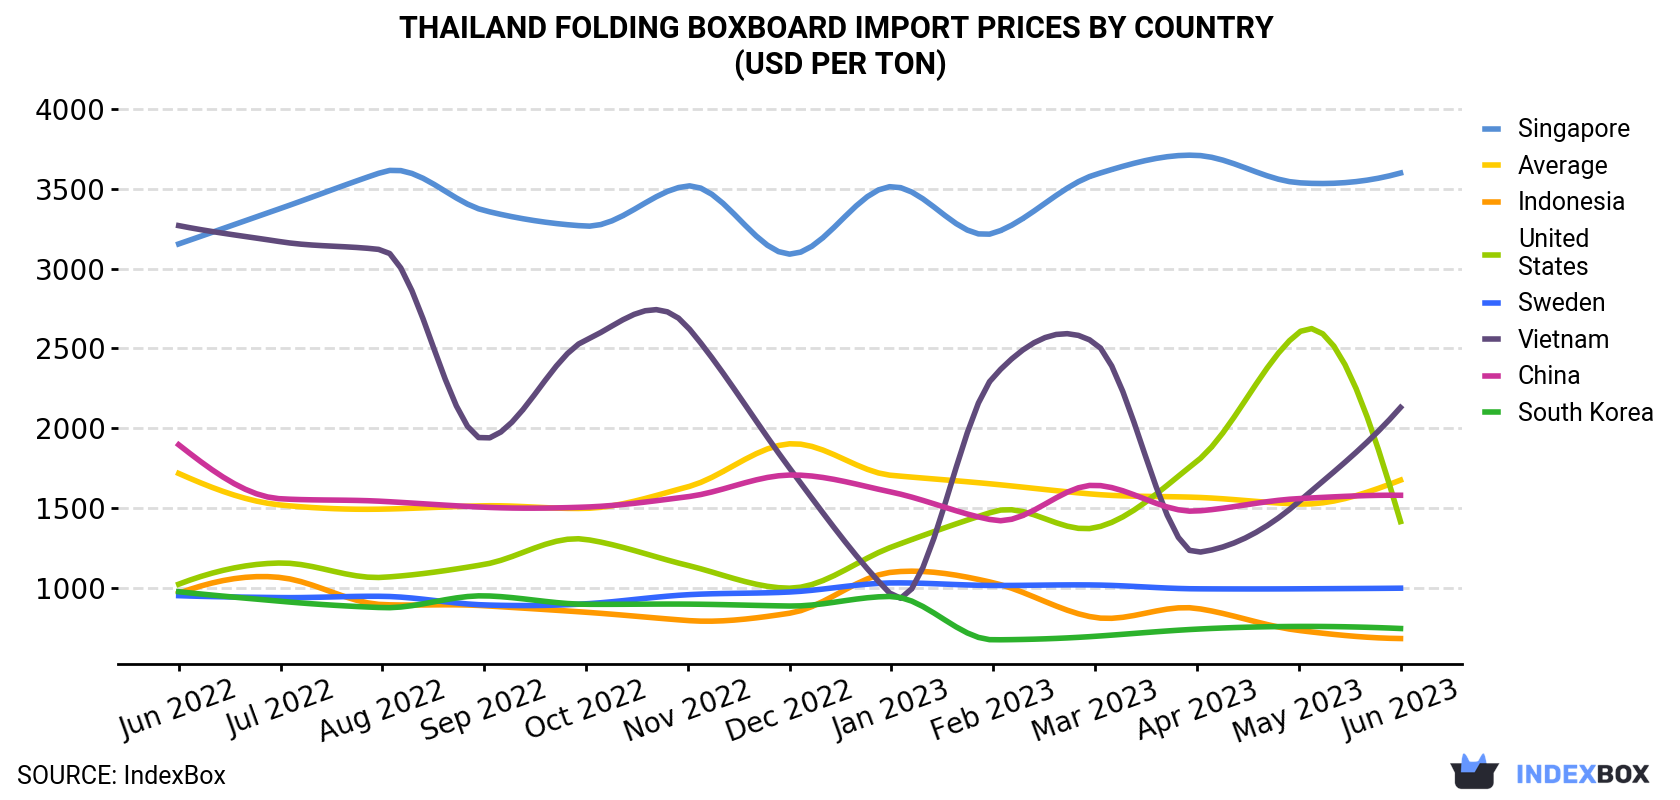 Thailand Folding Boxboard Import Prices By Country (USD Per Ton)